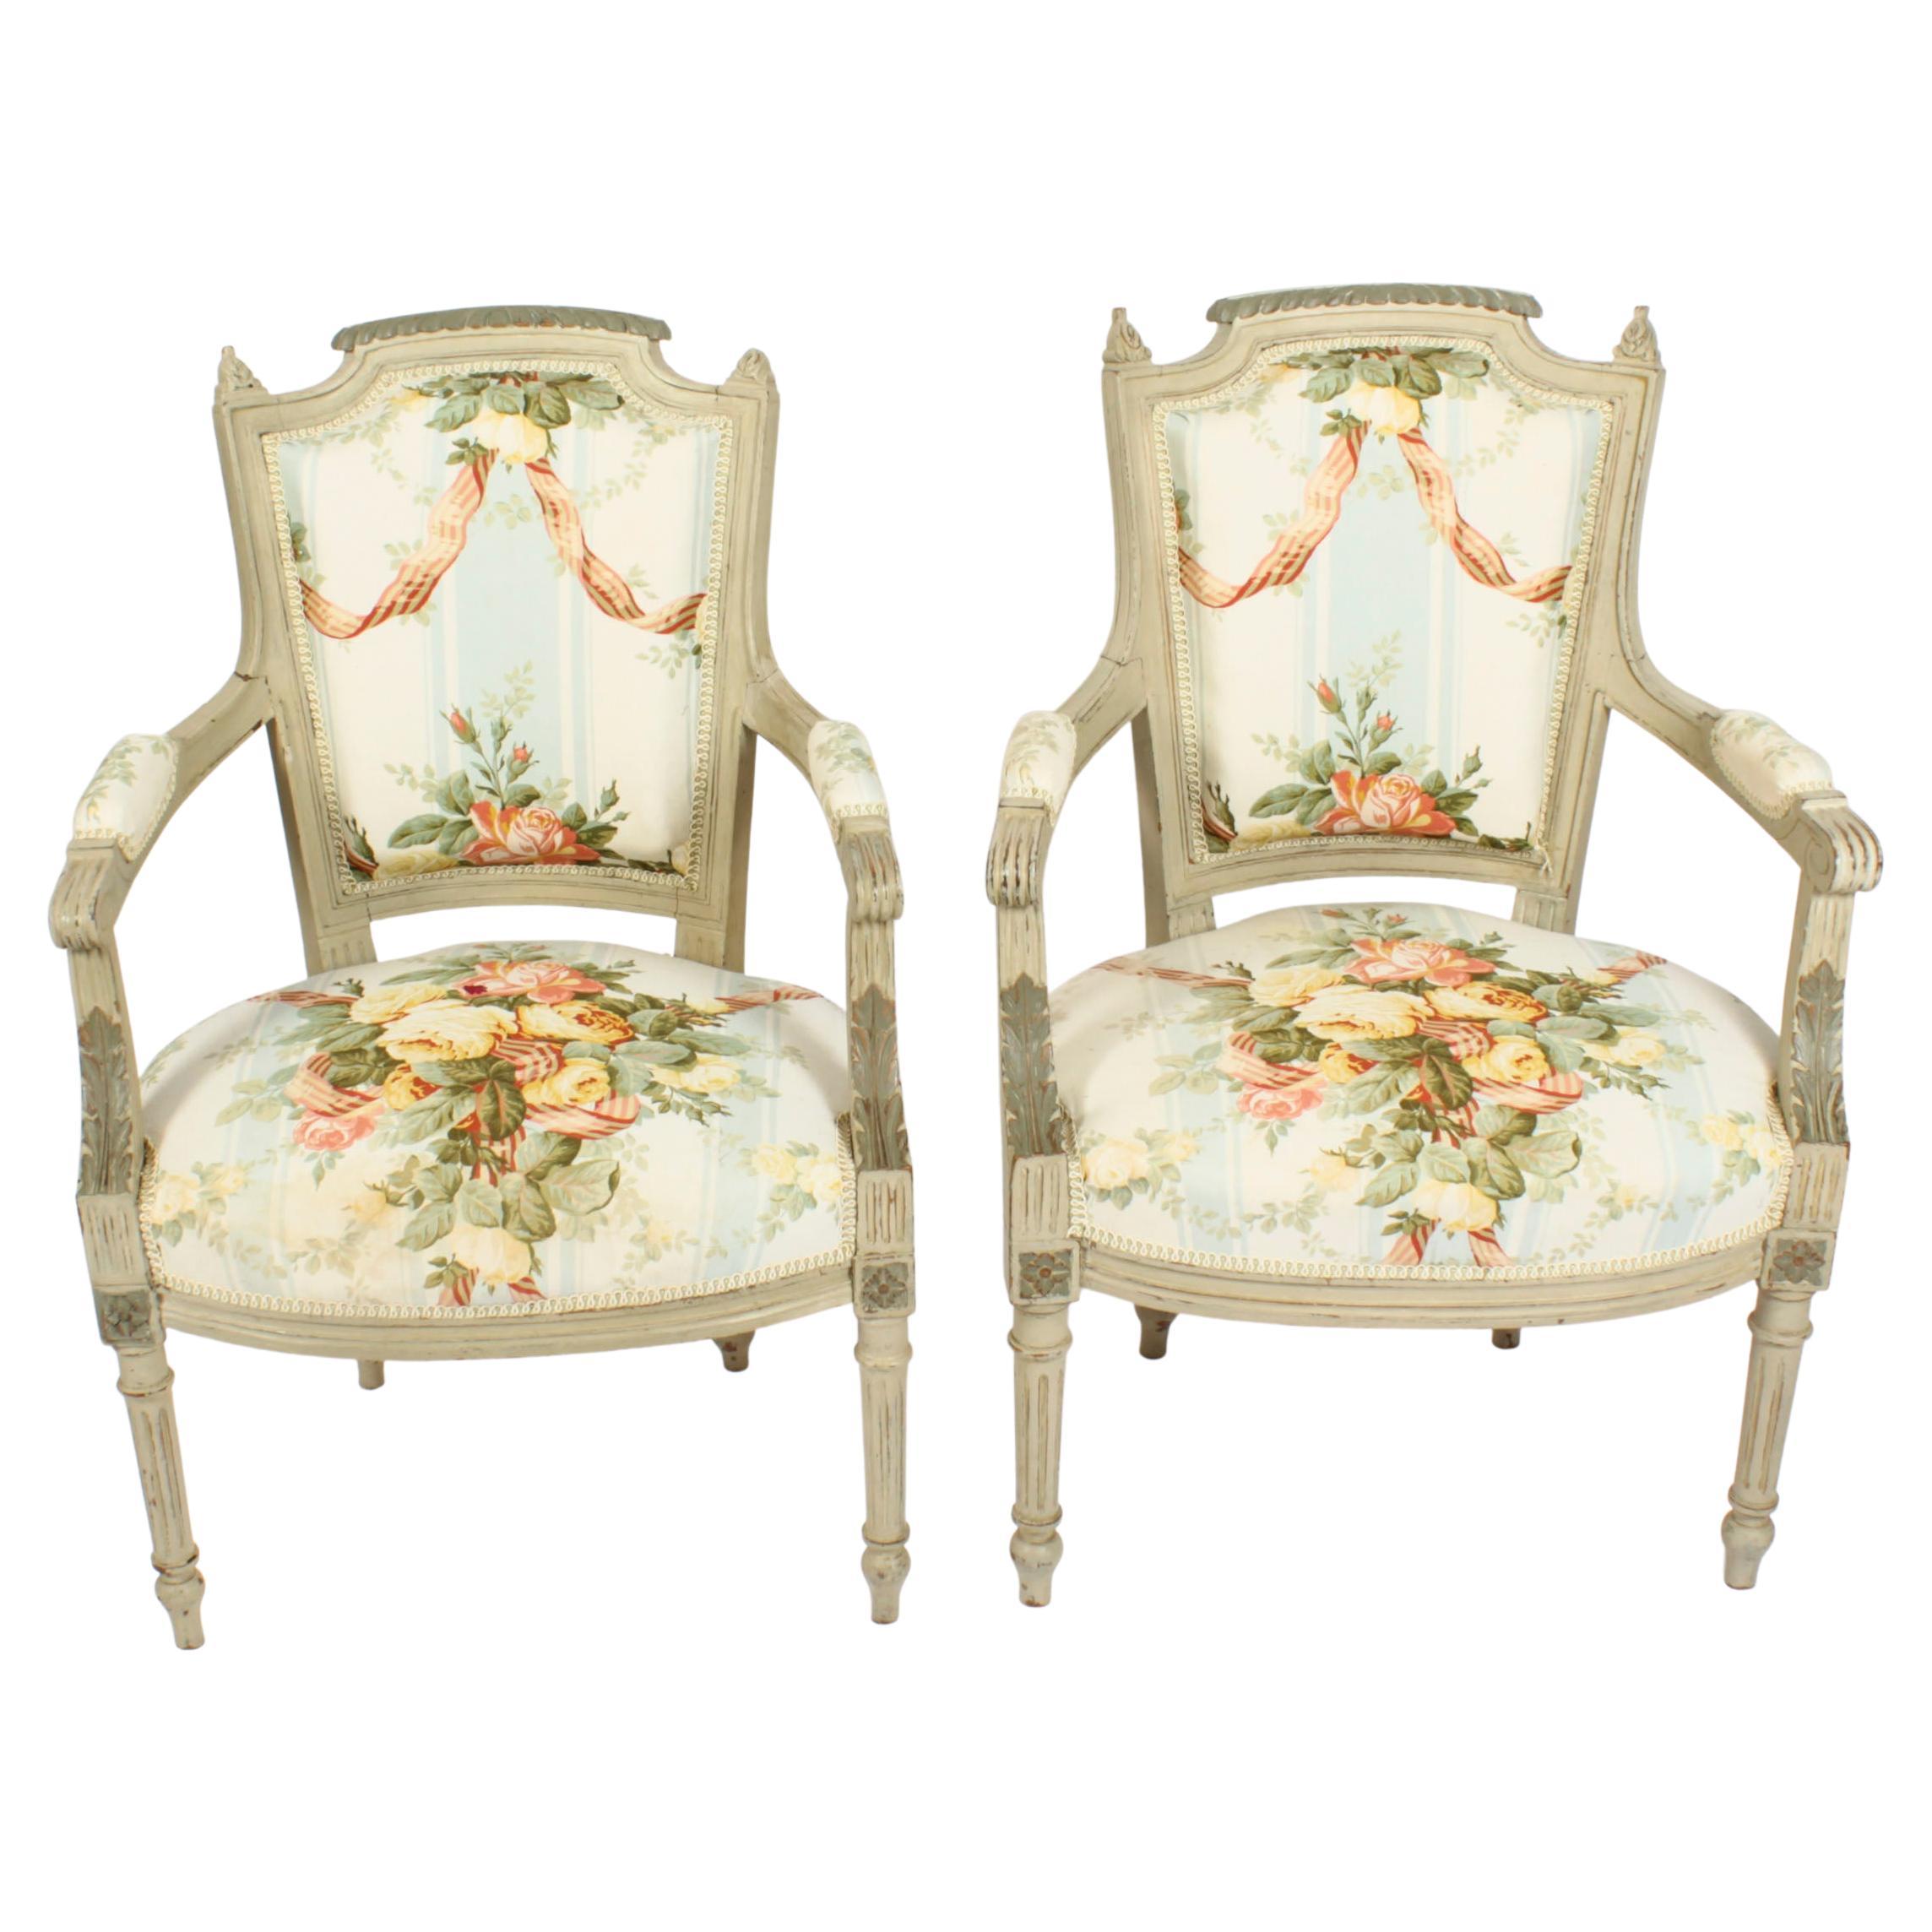 Antique Pair French Louis XVI Revival Painted Fauteuil Armchairs, 19th Century For Sale